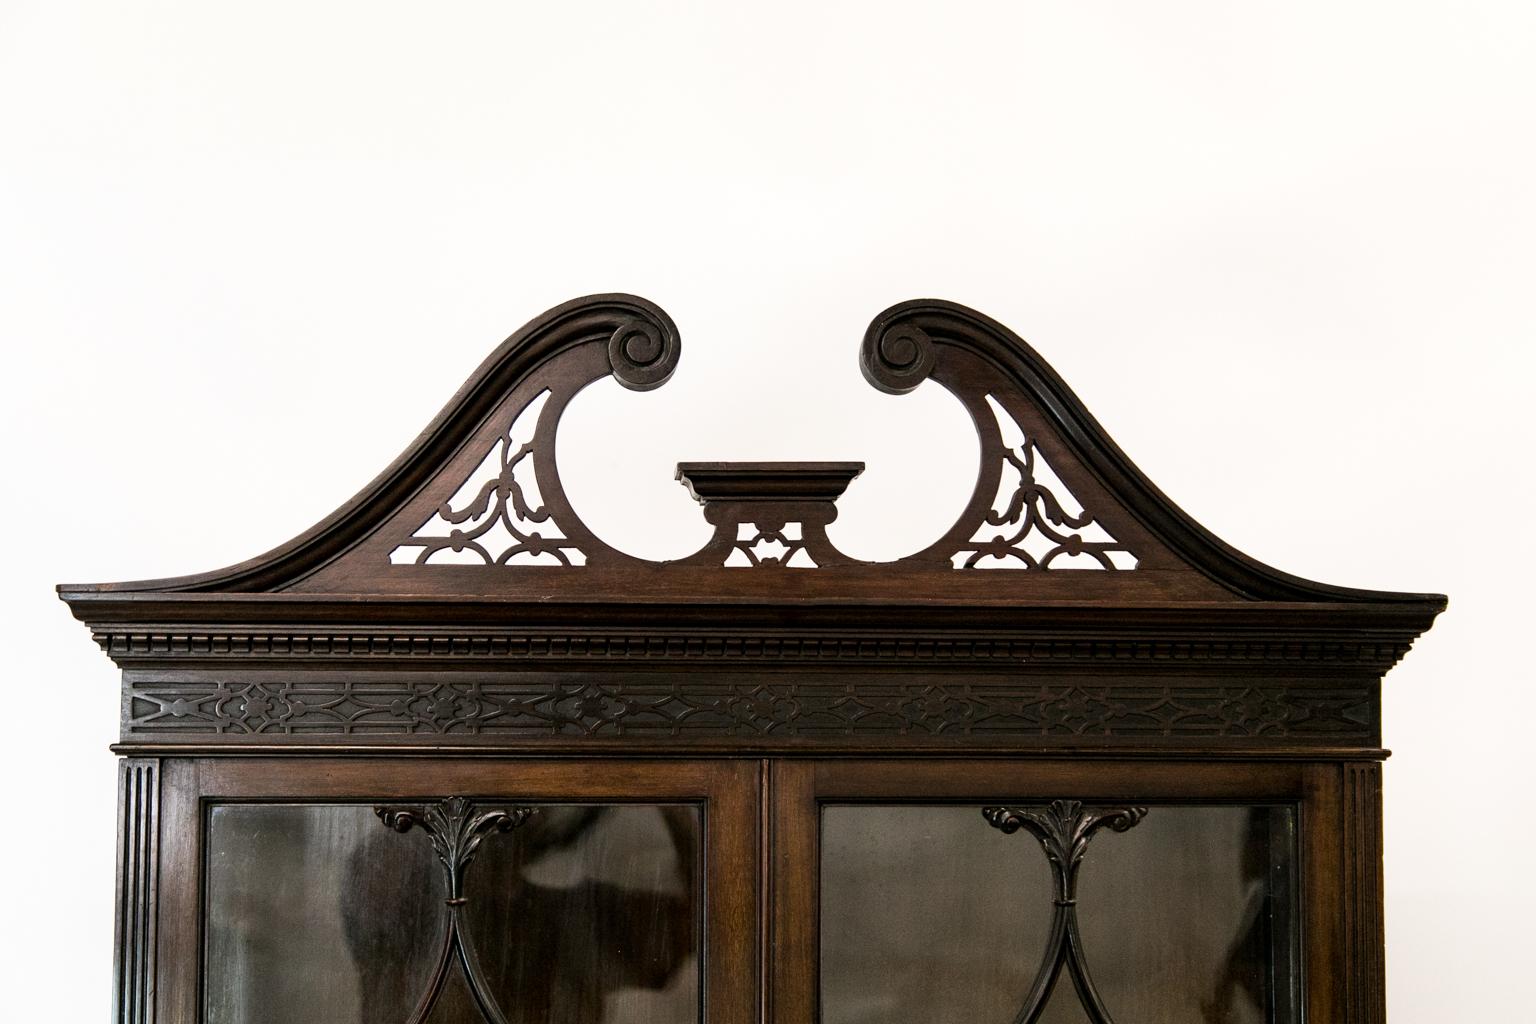 The upper display cabinet of this mahogany bookcase on stand has the original wavy glass doors. The side stiles of the drawers are fluted and the frieze has blind fretwork. The crown molding has ogee shaped dentil work. The top has a broken arch